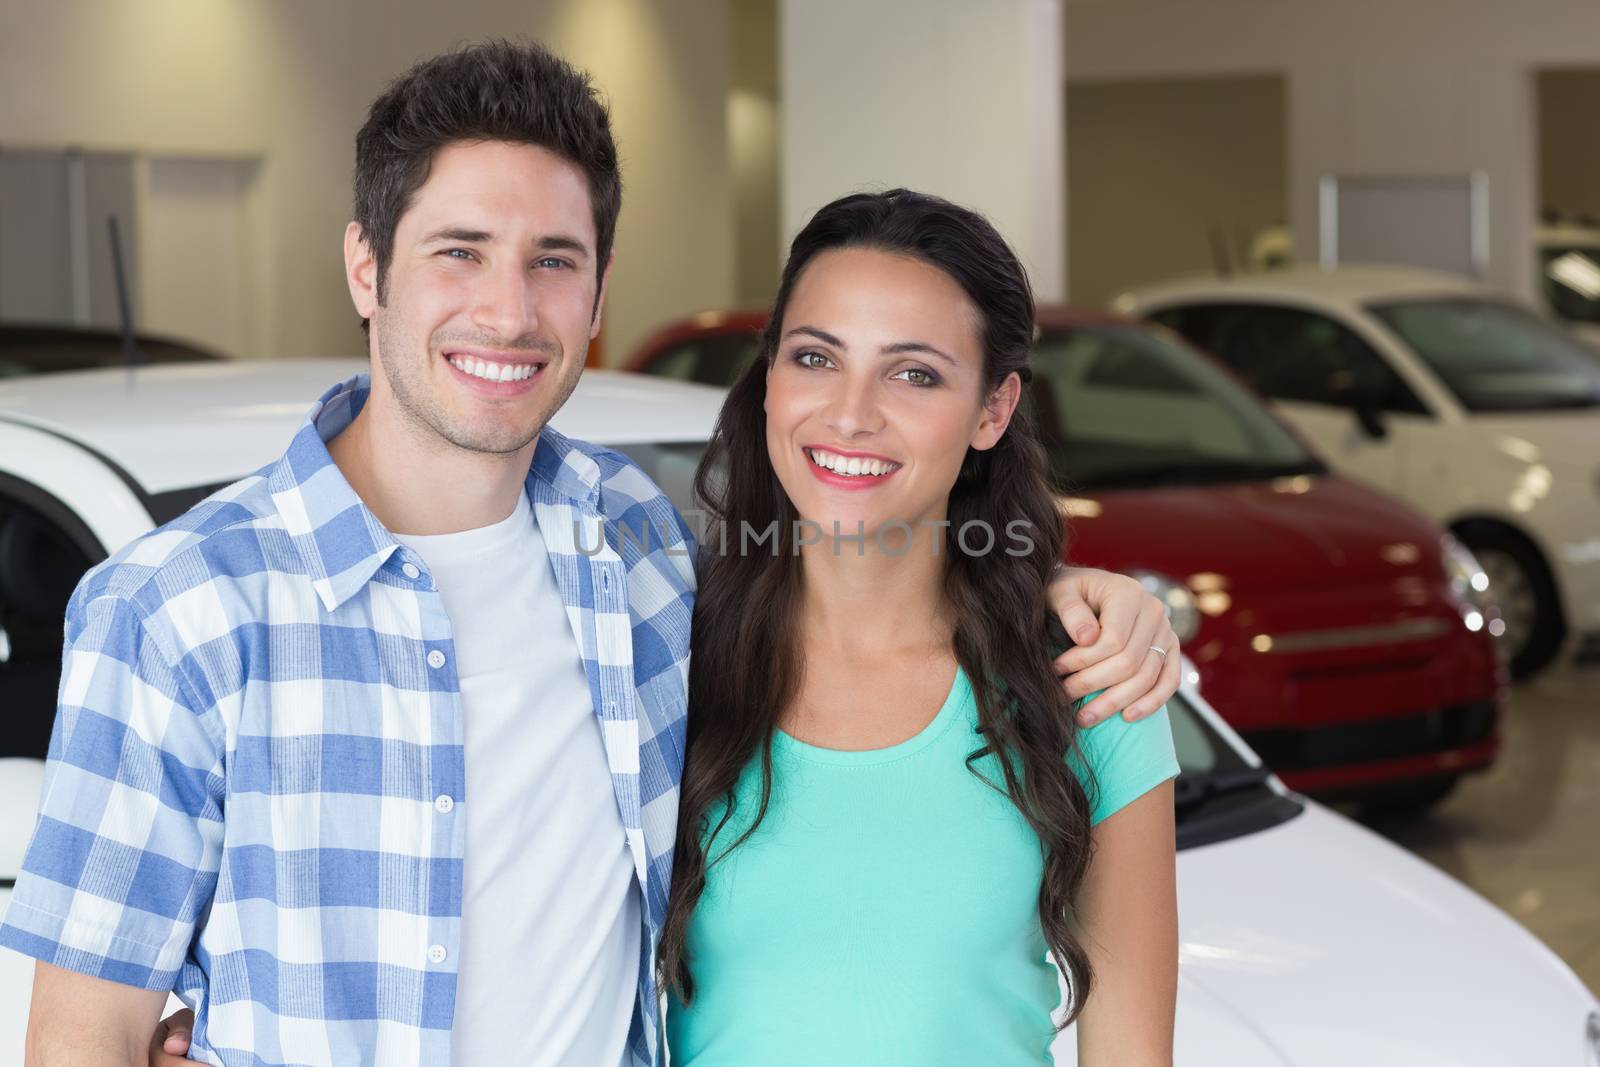 Smiling couple standing in front of a car at new car showroom